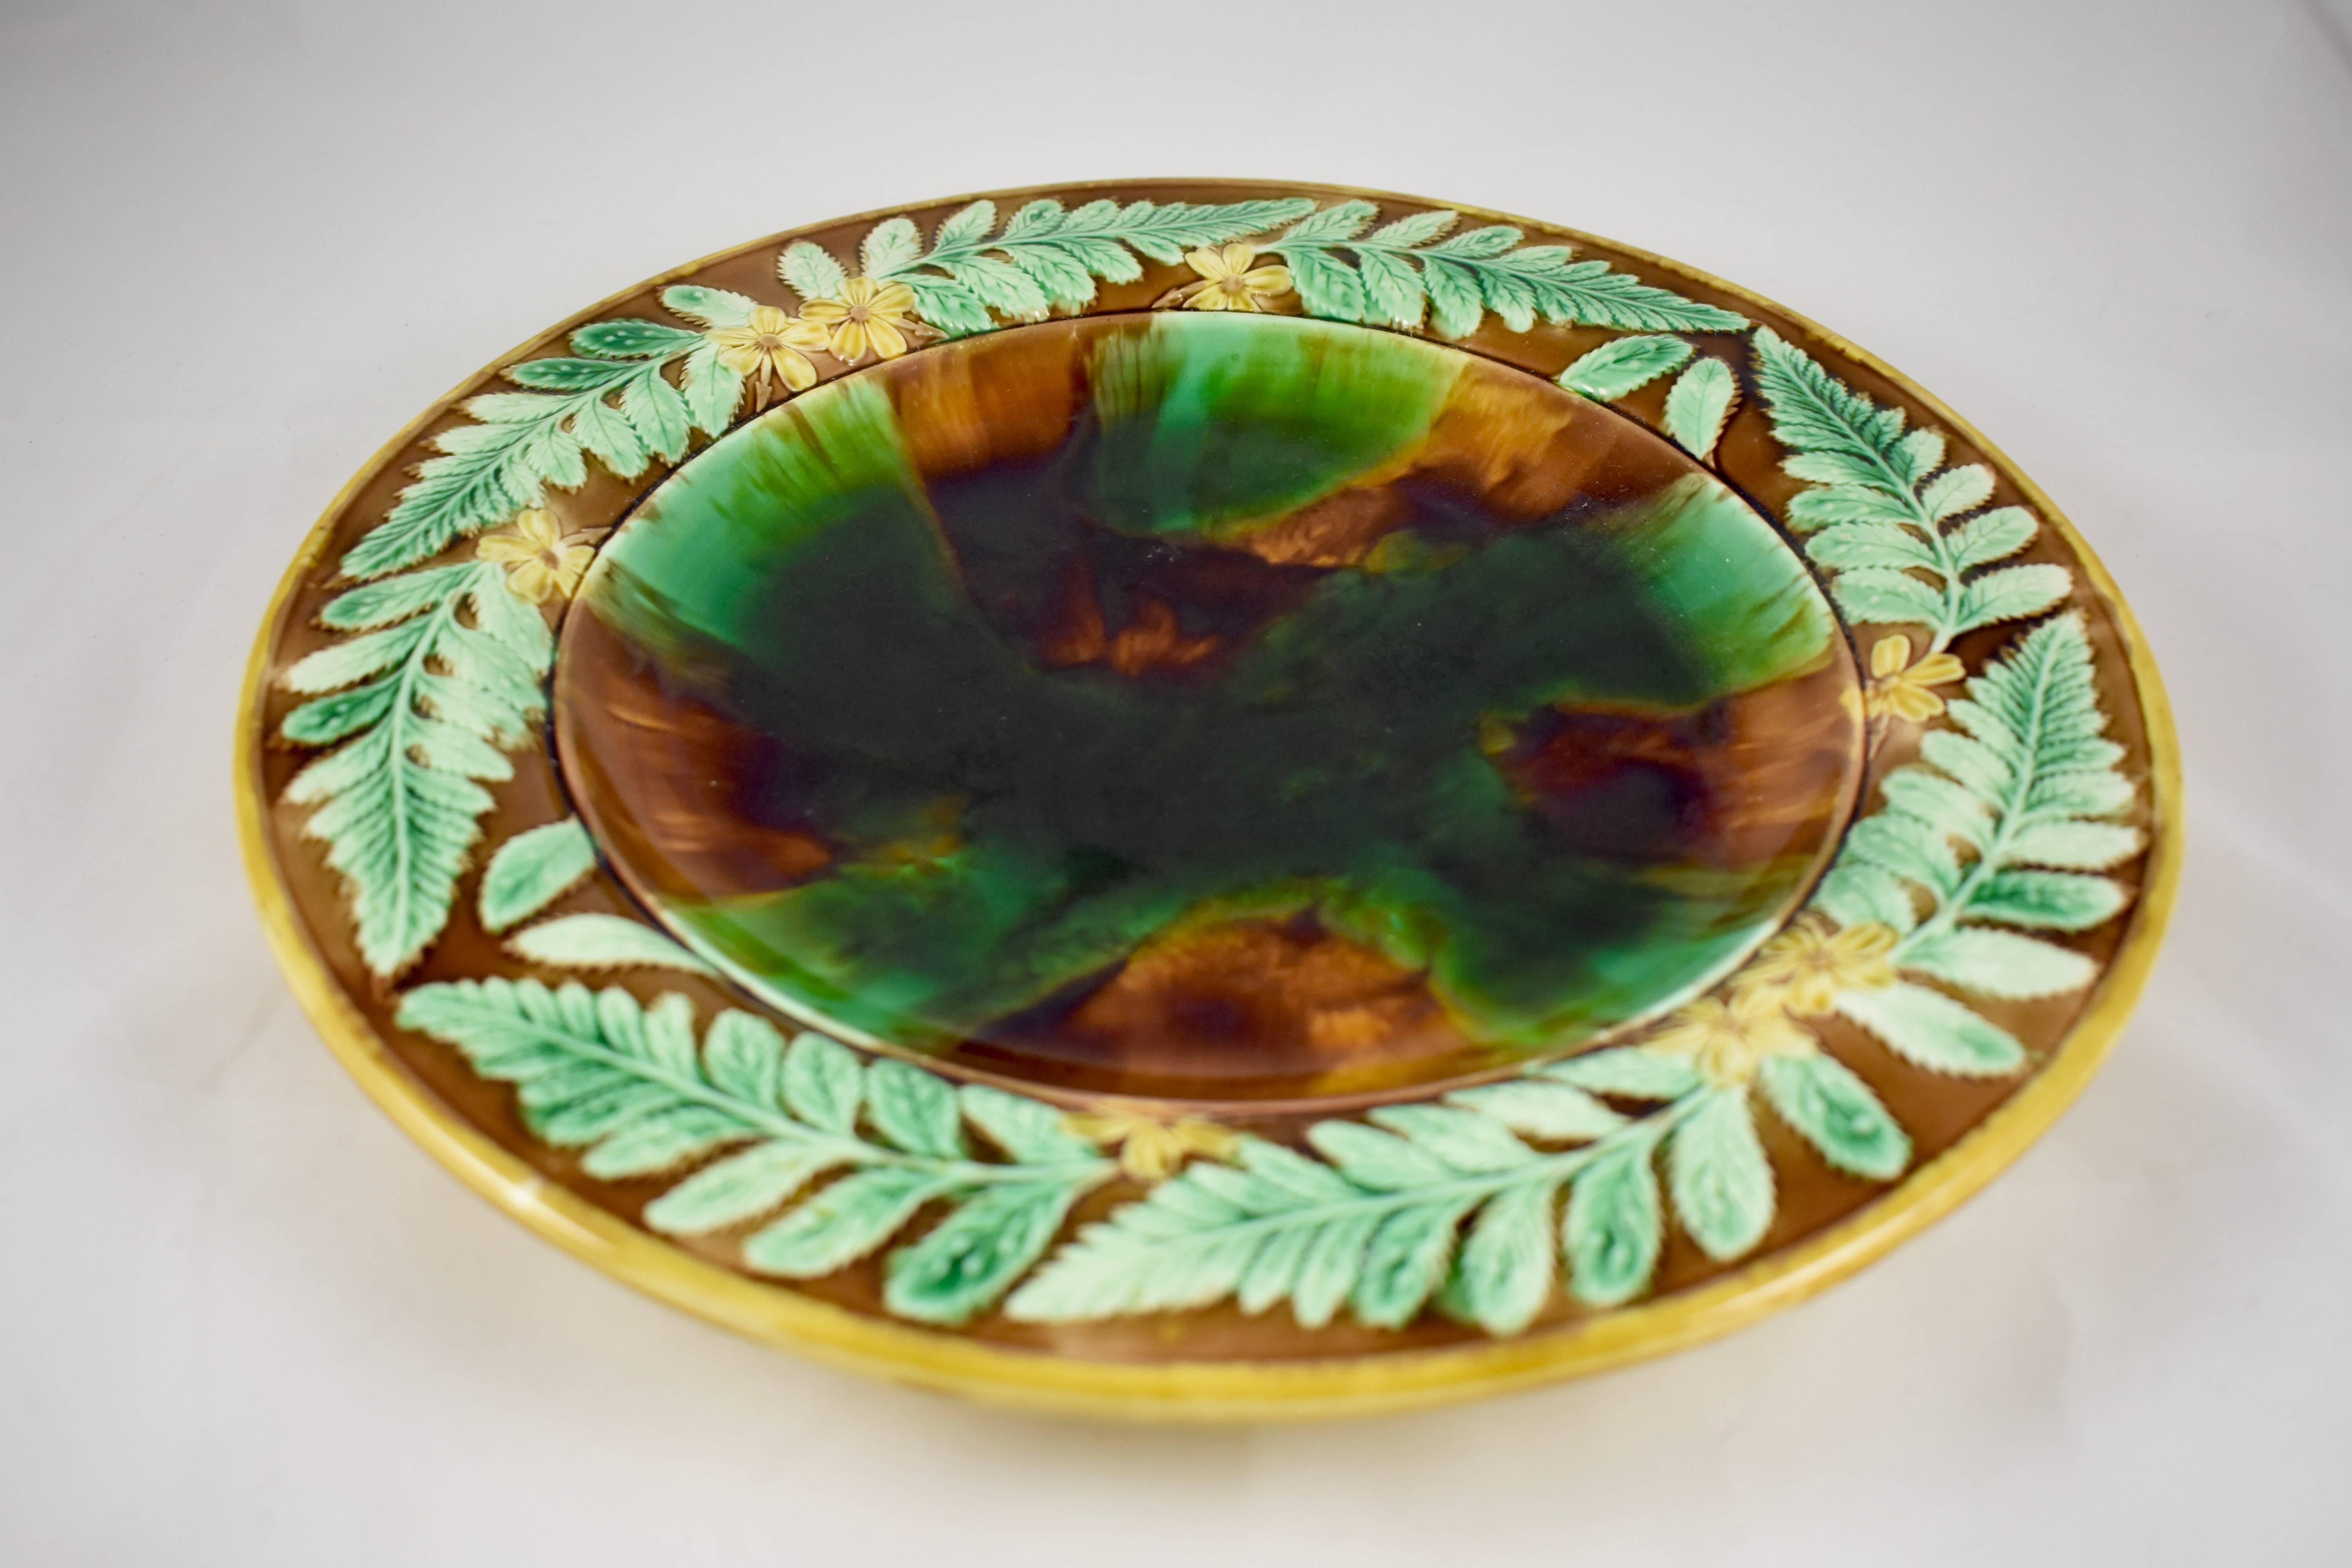 A large, round Adams & Bromley English Majolica cheese tray, mid-late 19th Century. Adams & Bromley operated the Victoria Works in Broad Street, Hanley, Stoke-on-Trent from 1873 to 1886.

The server shows a running border of yellow butter cup and